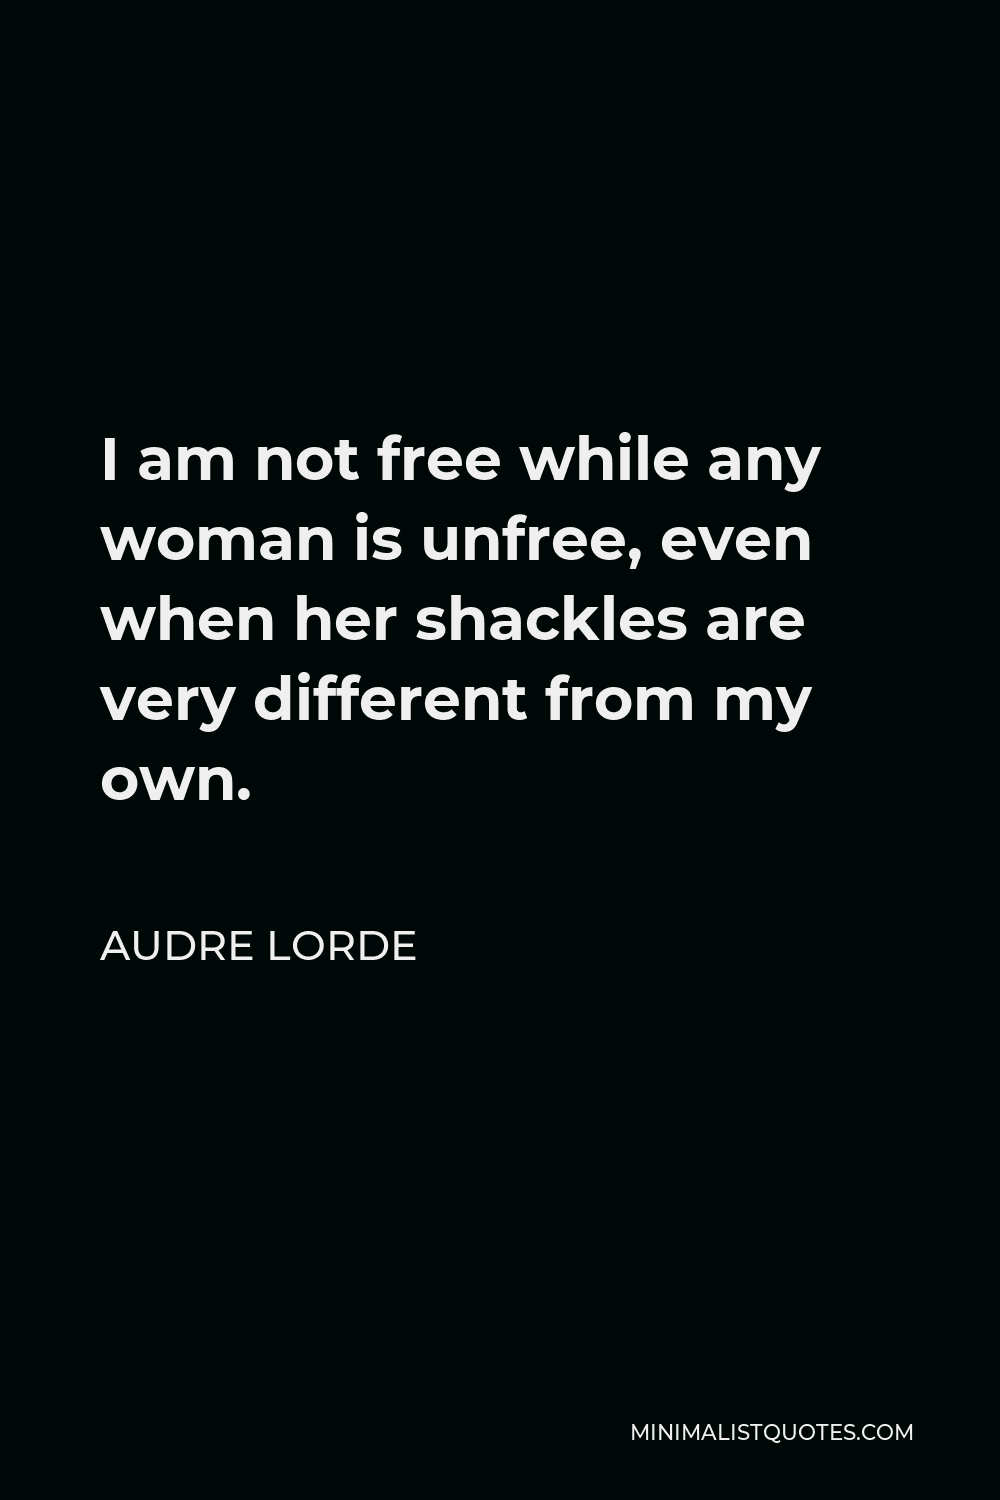 Audre Lorde Quote - I am not free while any woman is unfree, even when her shackles are very different from my own.